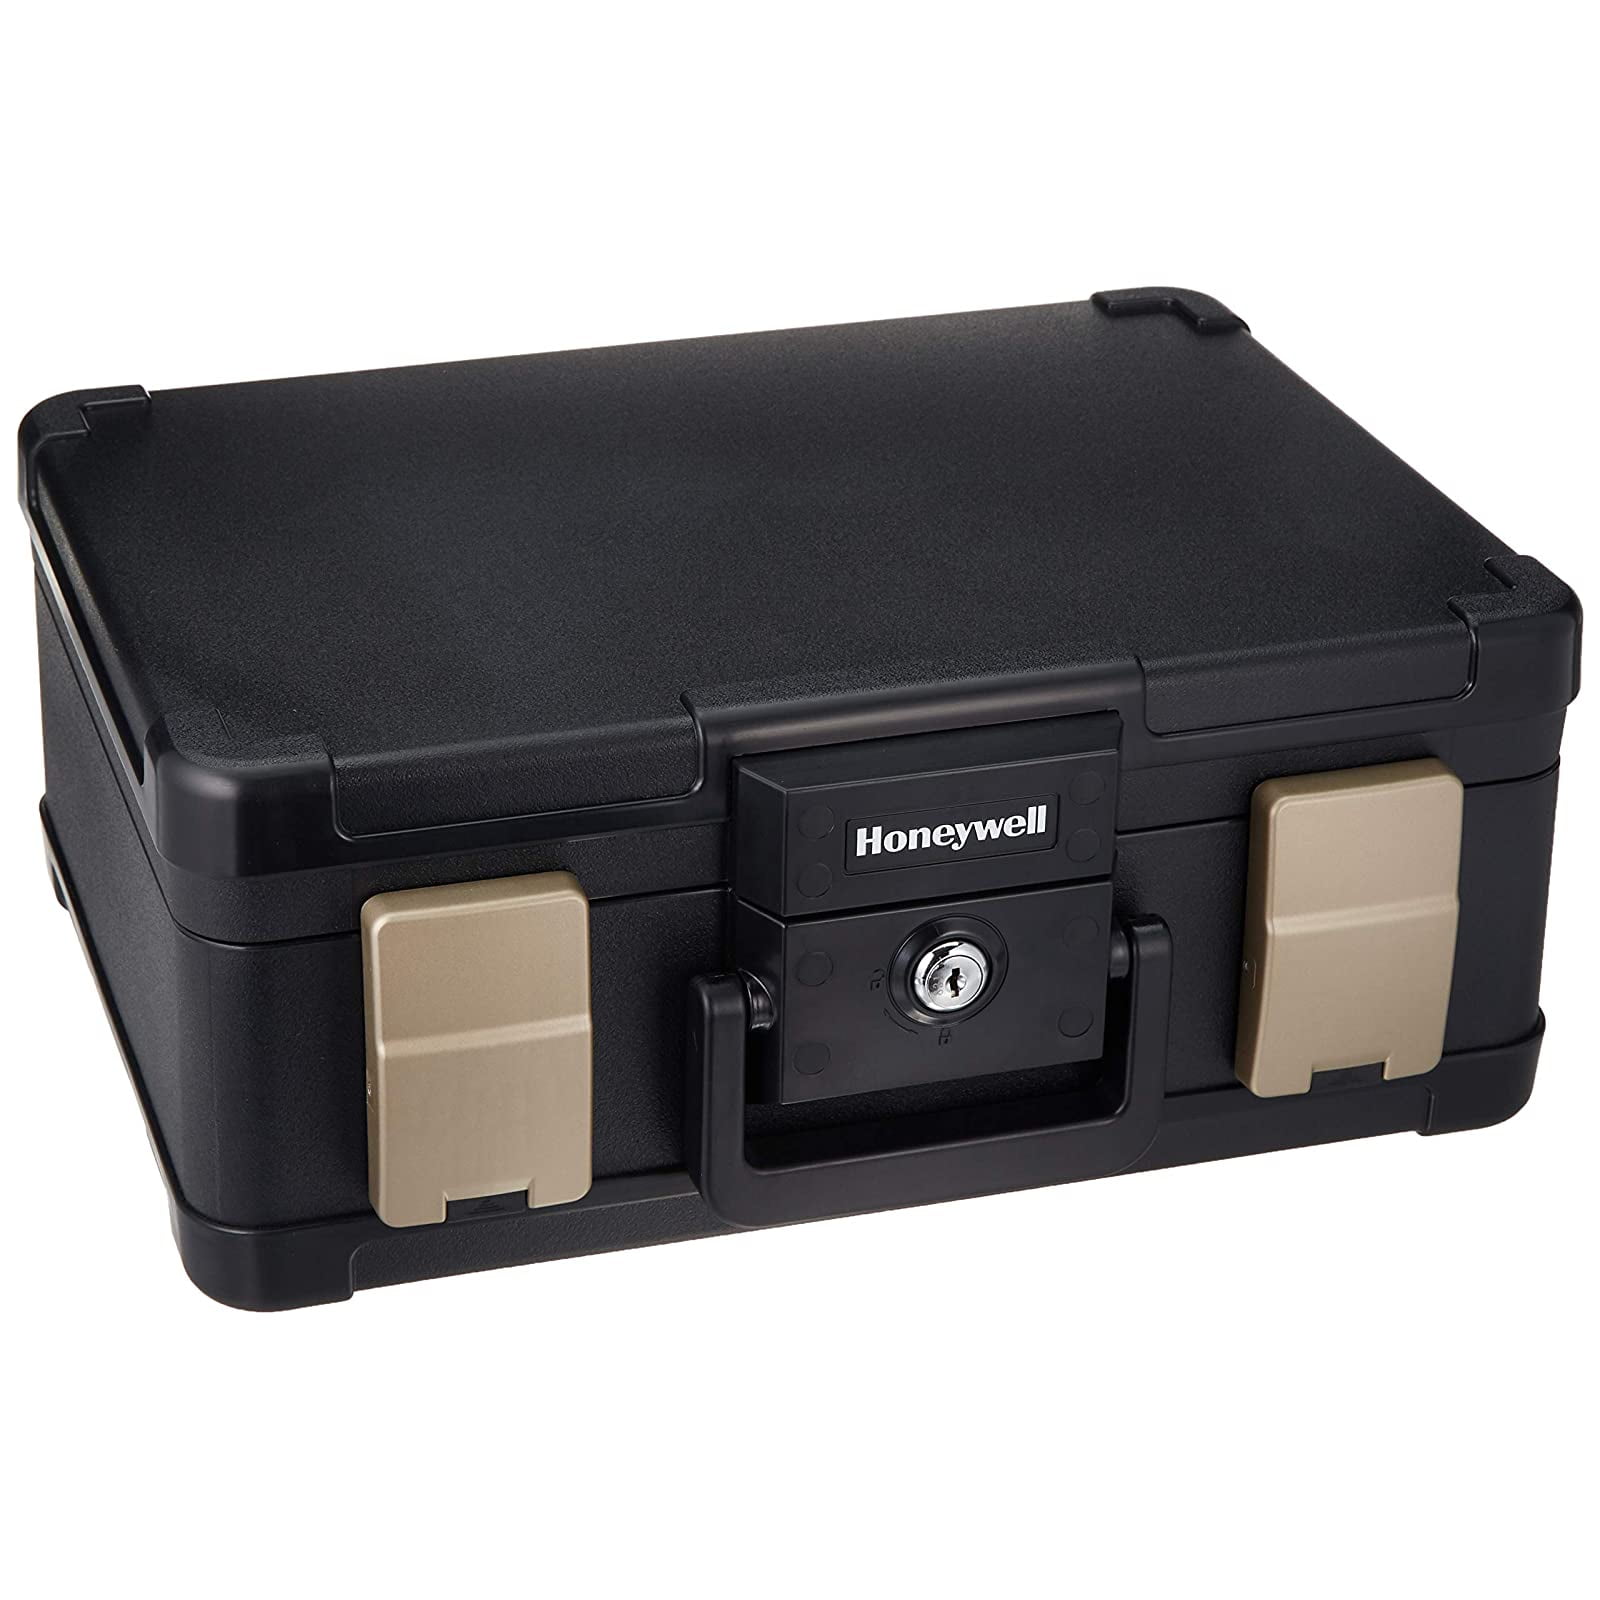 Fireproof Waterproof Safe Flood USB Jewelry Money Coin File Protection Lock Box 